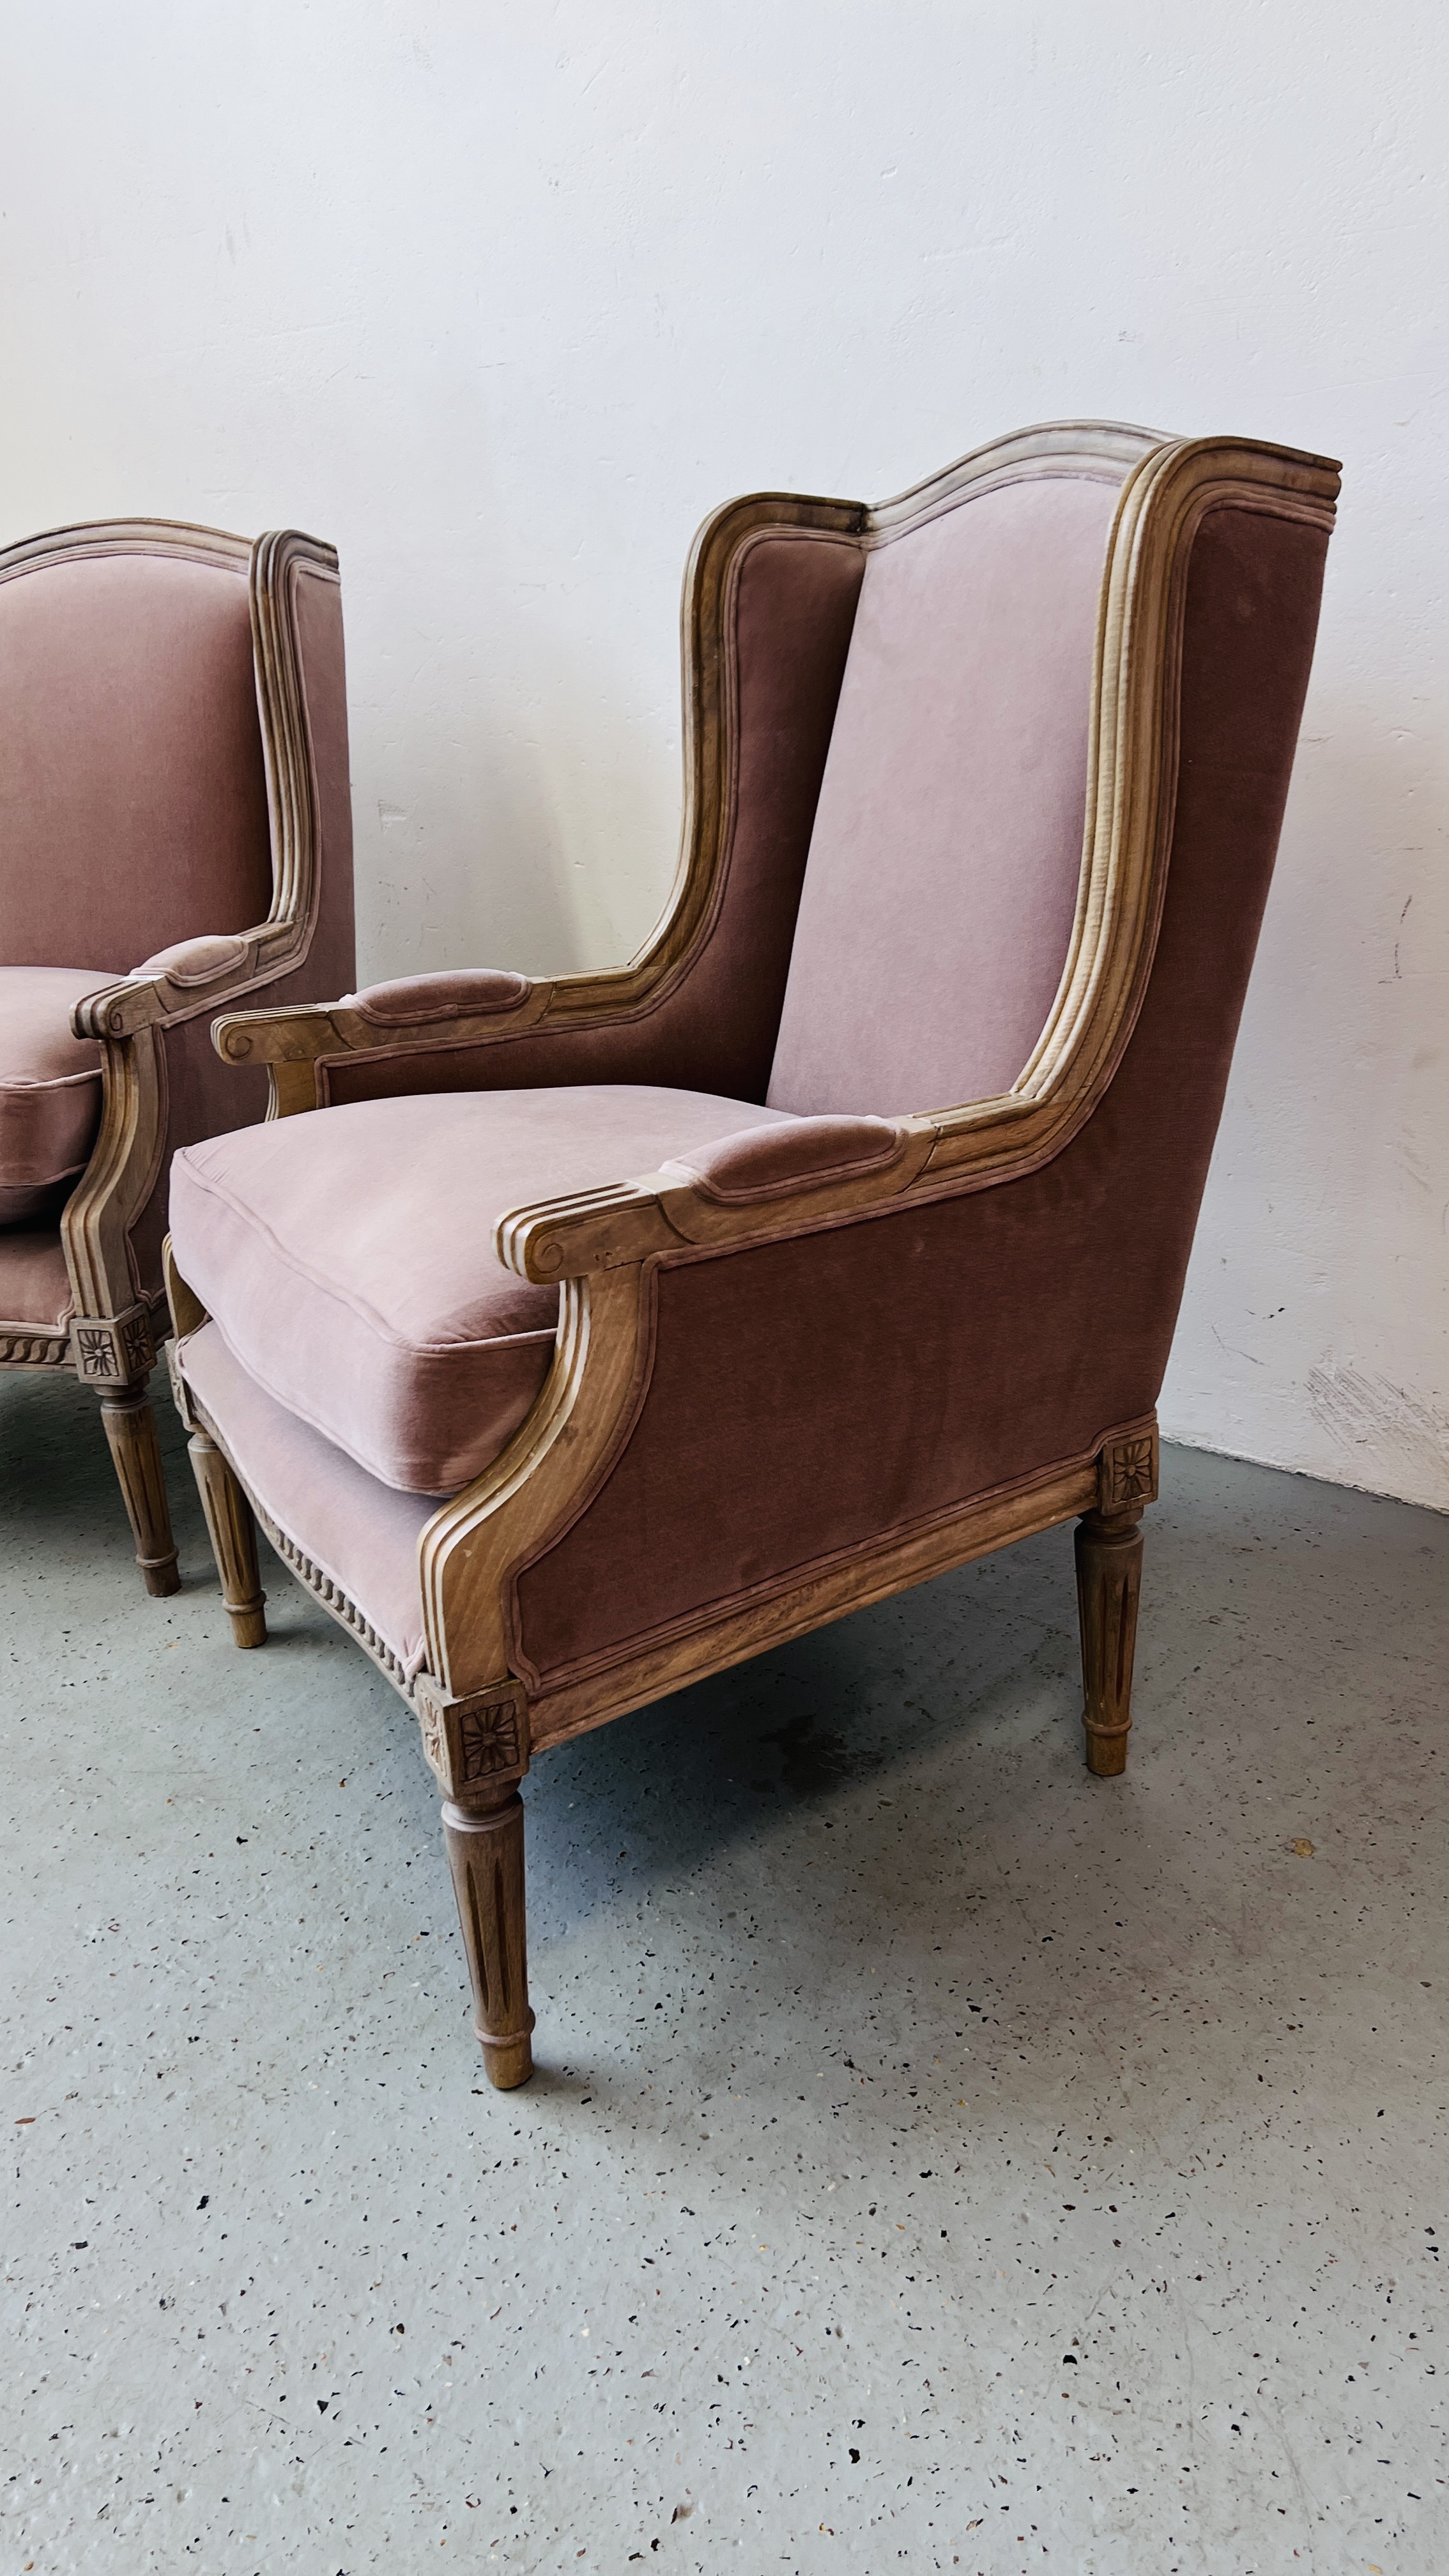 A PAIR OF GOOD QUALITY REPRODUCTION DUNELM LIMED FINISH FRENCH STYLE ARM CHAIRS WITH MAUVE - Image 2 of 15